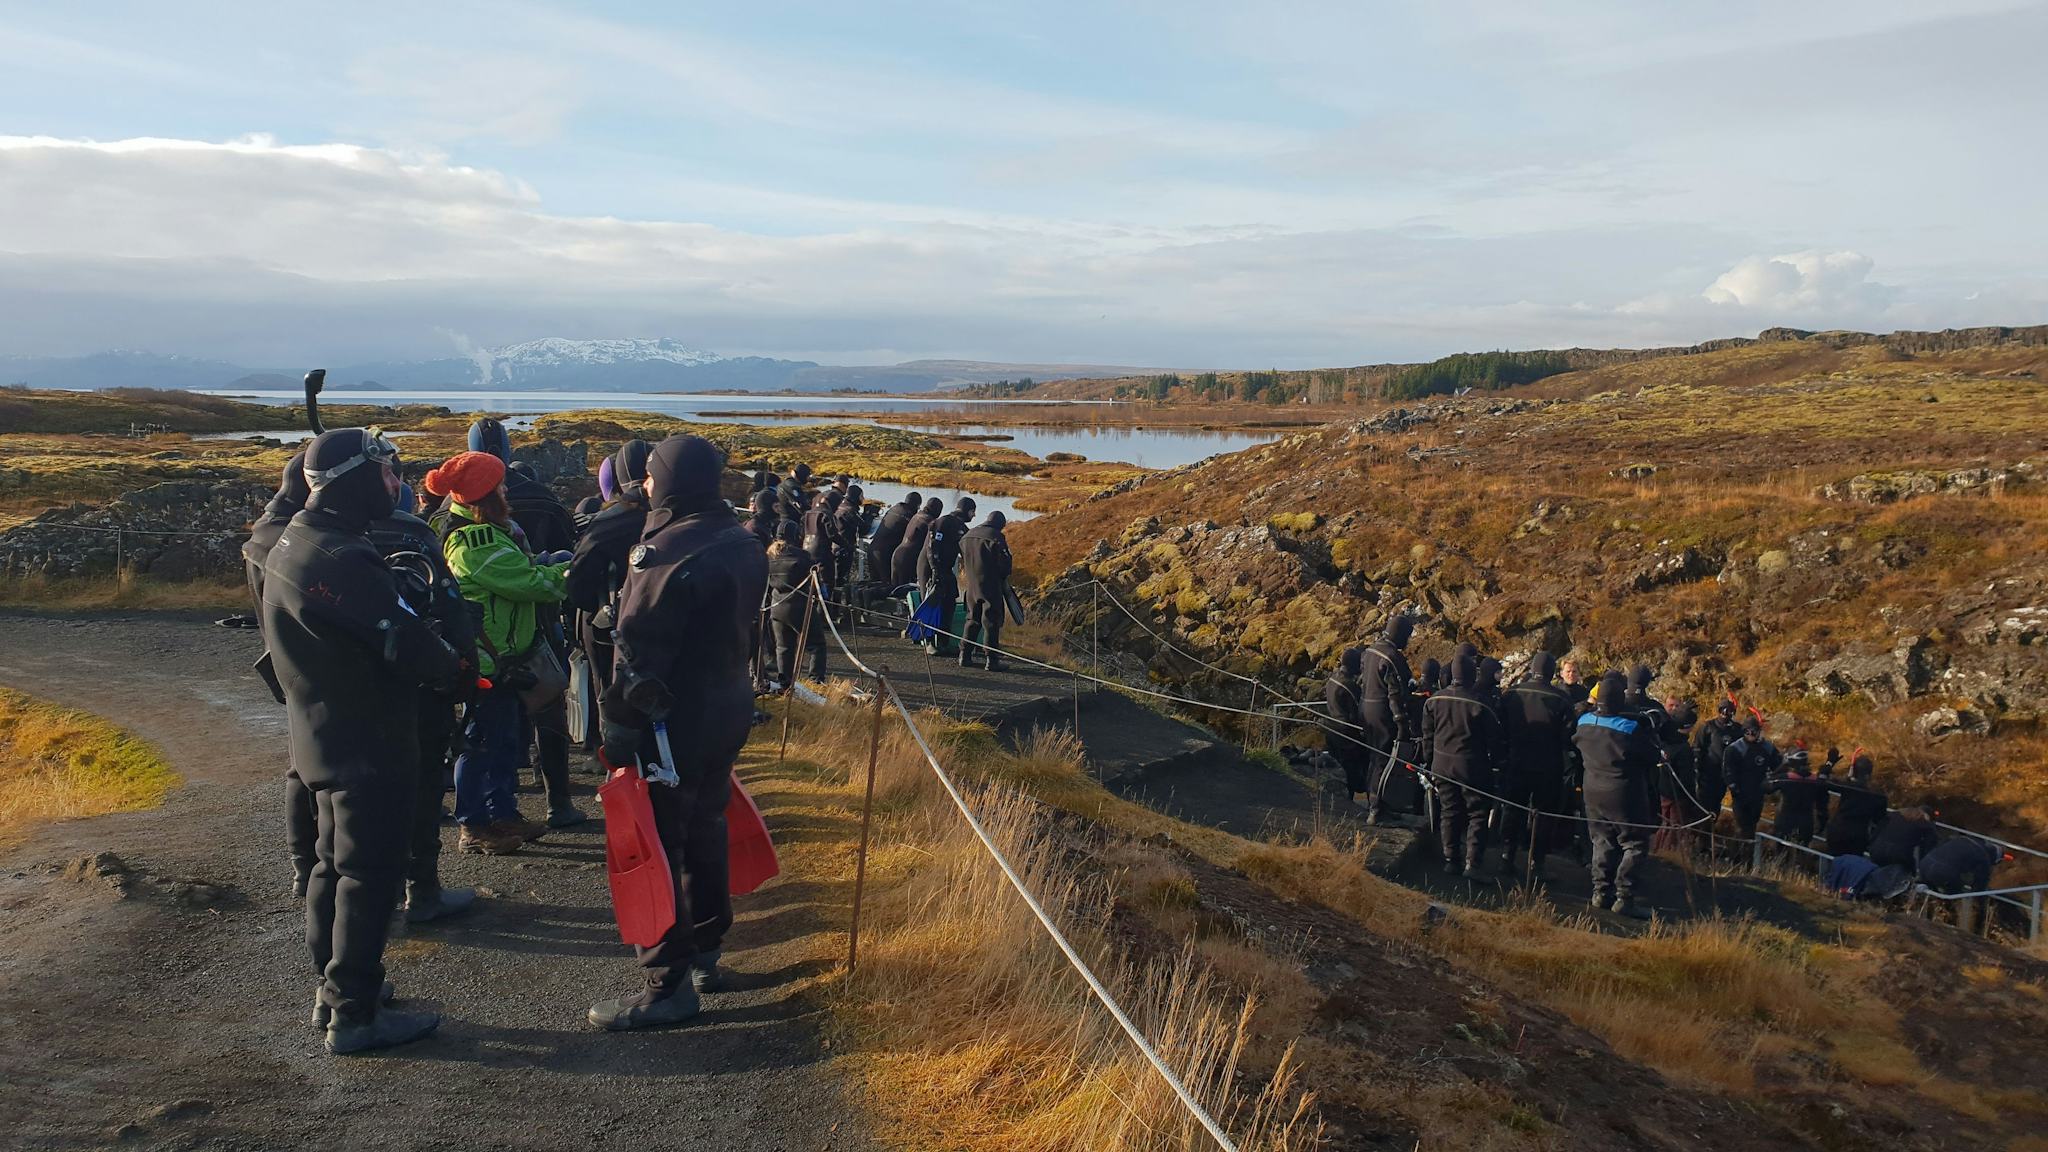 A crowd dressed in warm clothes, queuing or walking along a pathway. The scenery includes a lake and landscape of grasses.